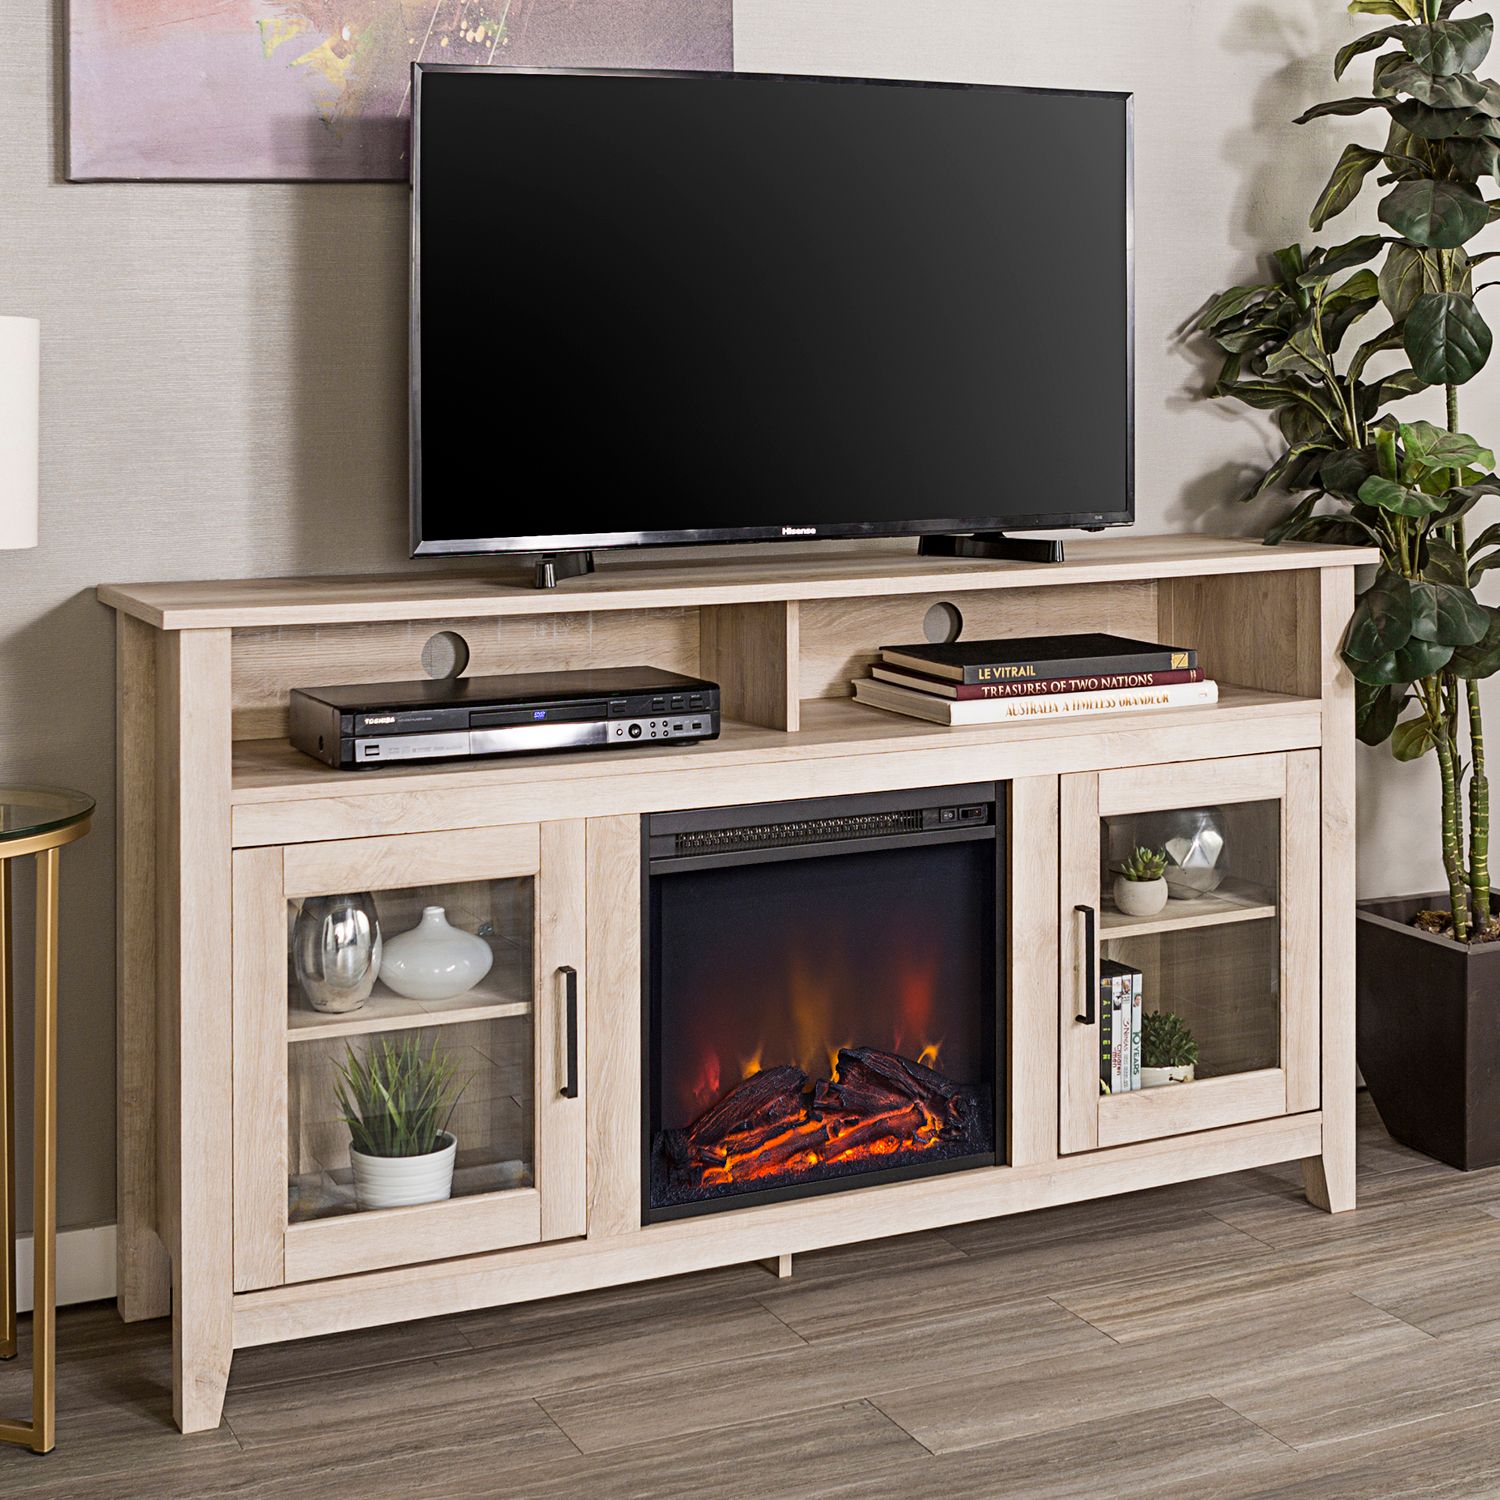 Highboy Wood Fireplace Tv Stand – Pier1 Intended For Wood Highboy Fireplace Tv Stands (Gallery 15 of 20)